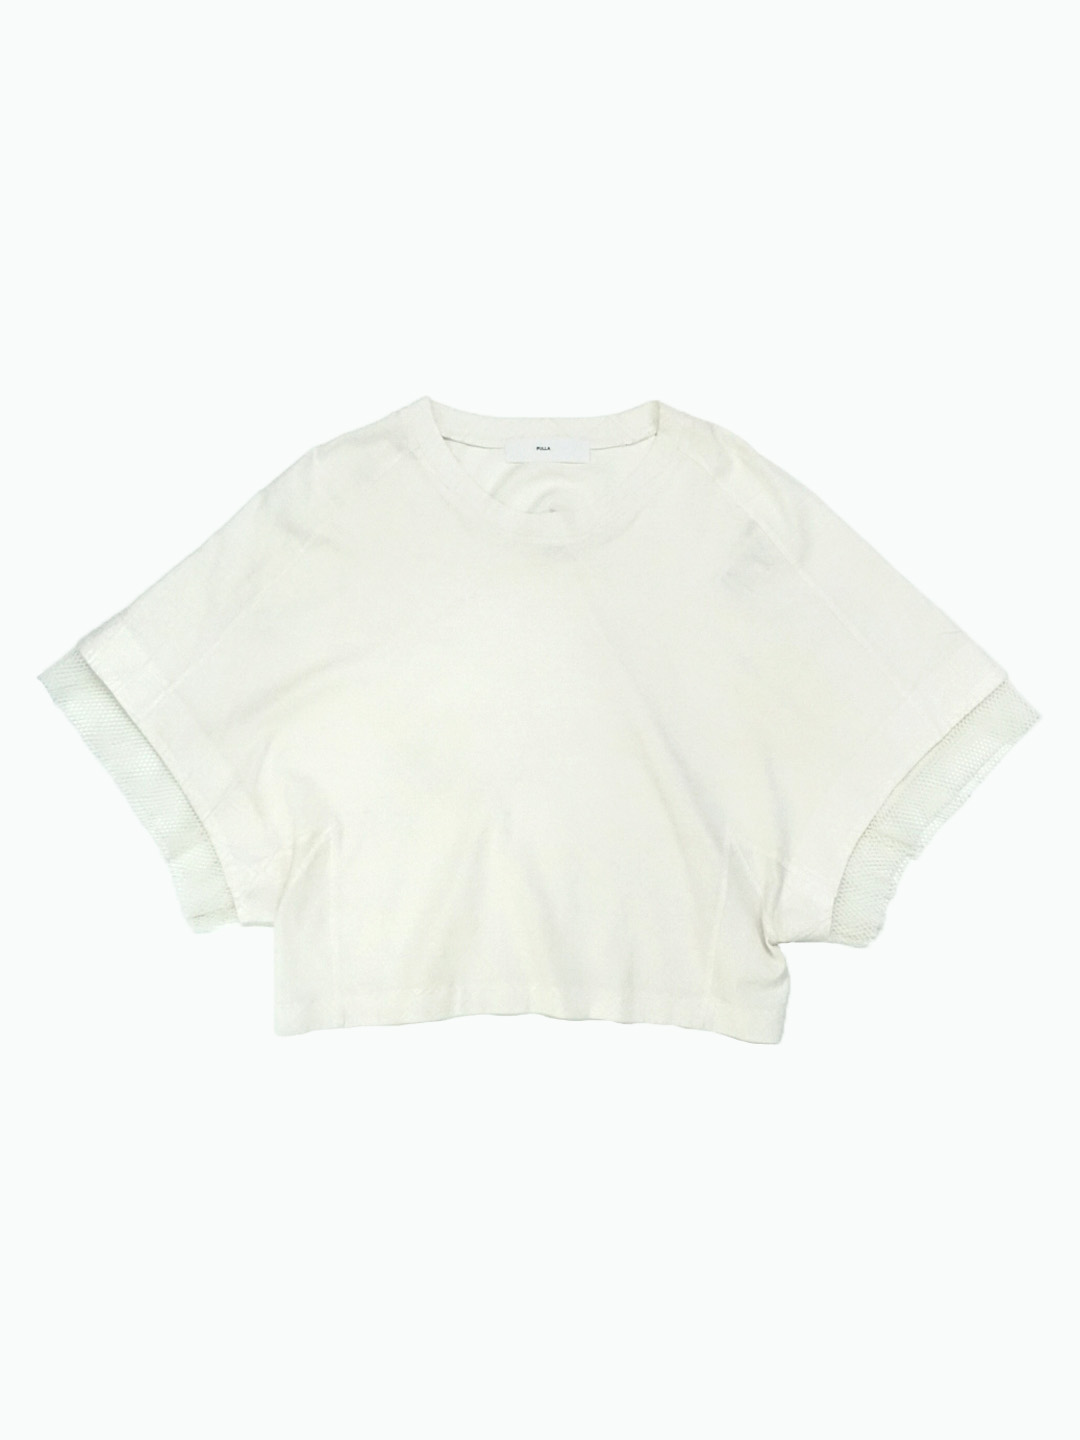 TOGA PULLAMesh point top